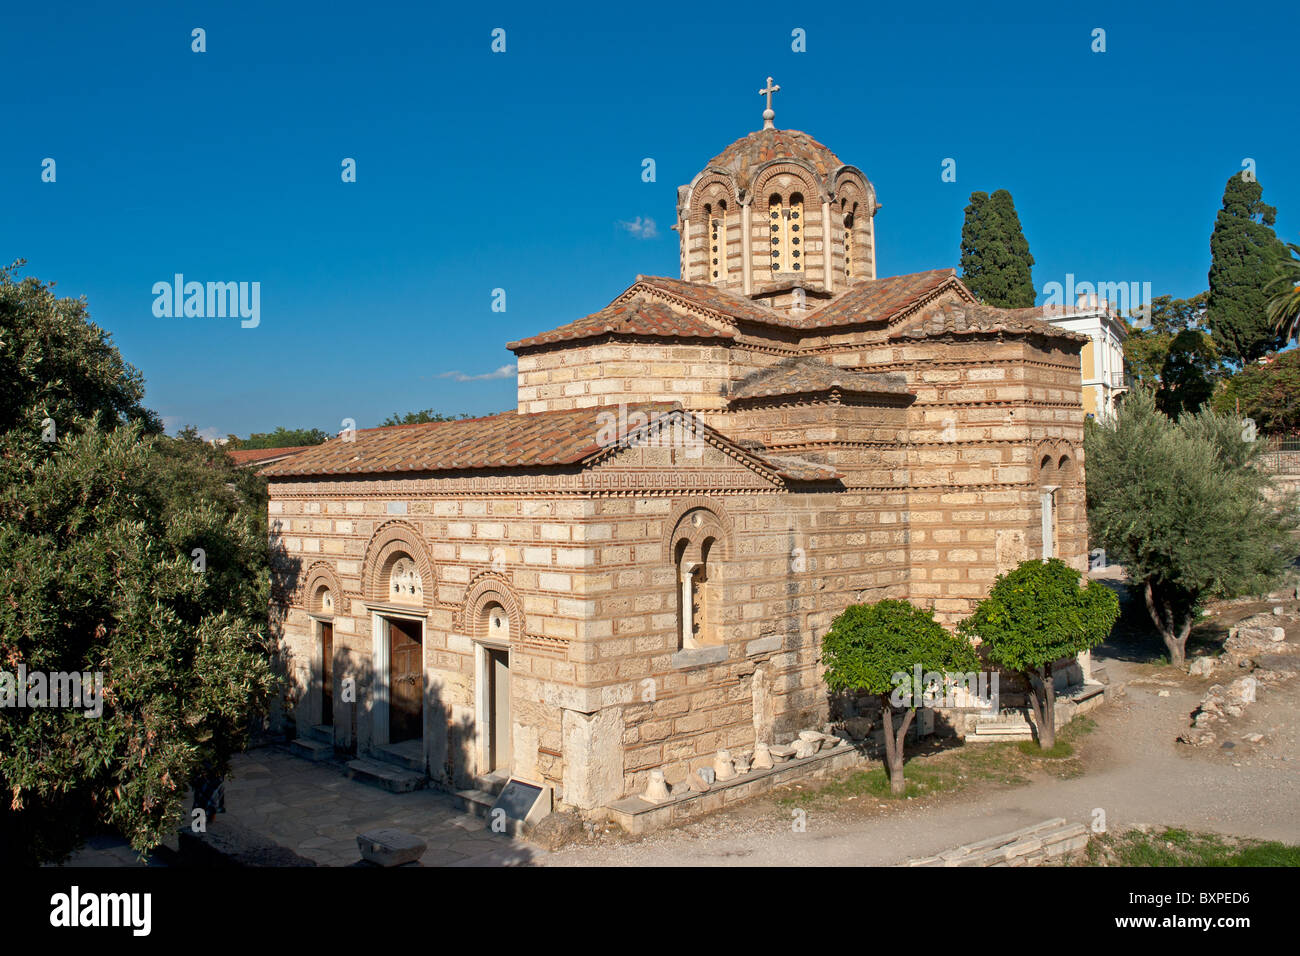 Byzantine Church of the Holy Apostles of Solakis, the only Byzantine building in the Ancient Agora, Athens,Greece Stock Photo